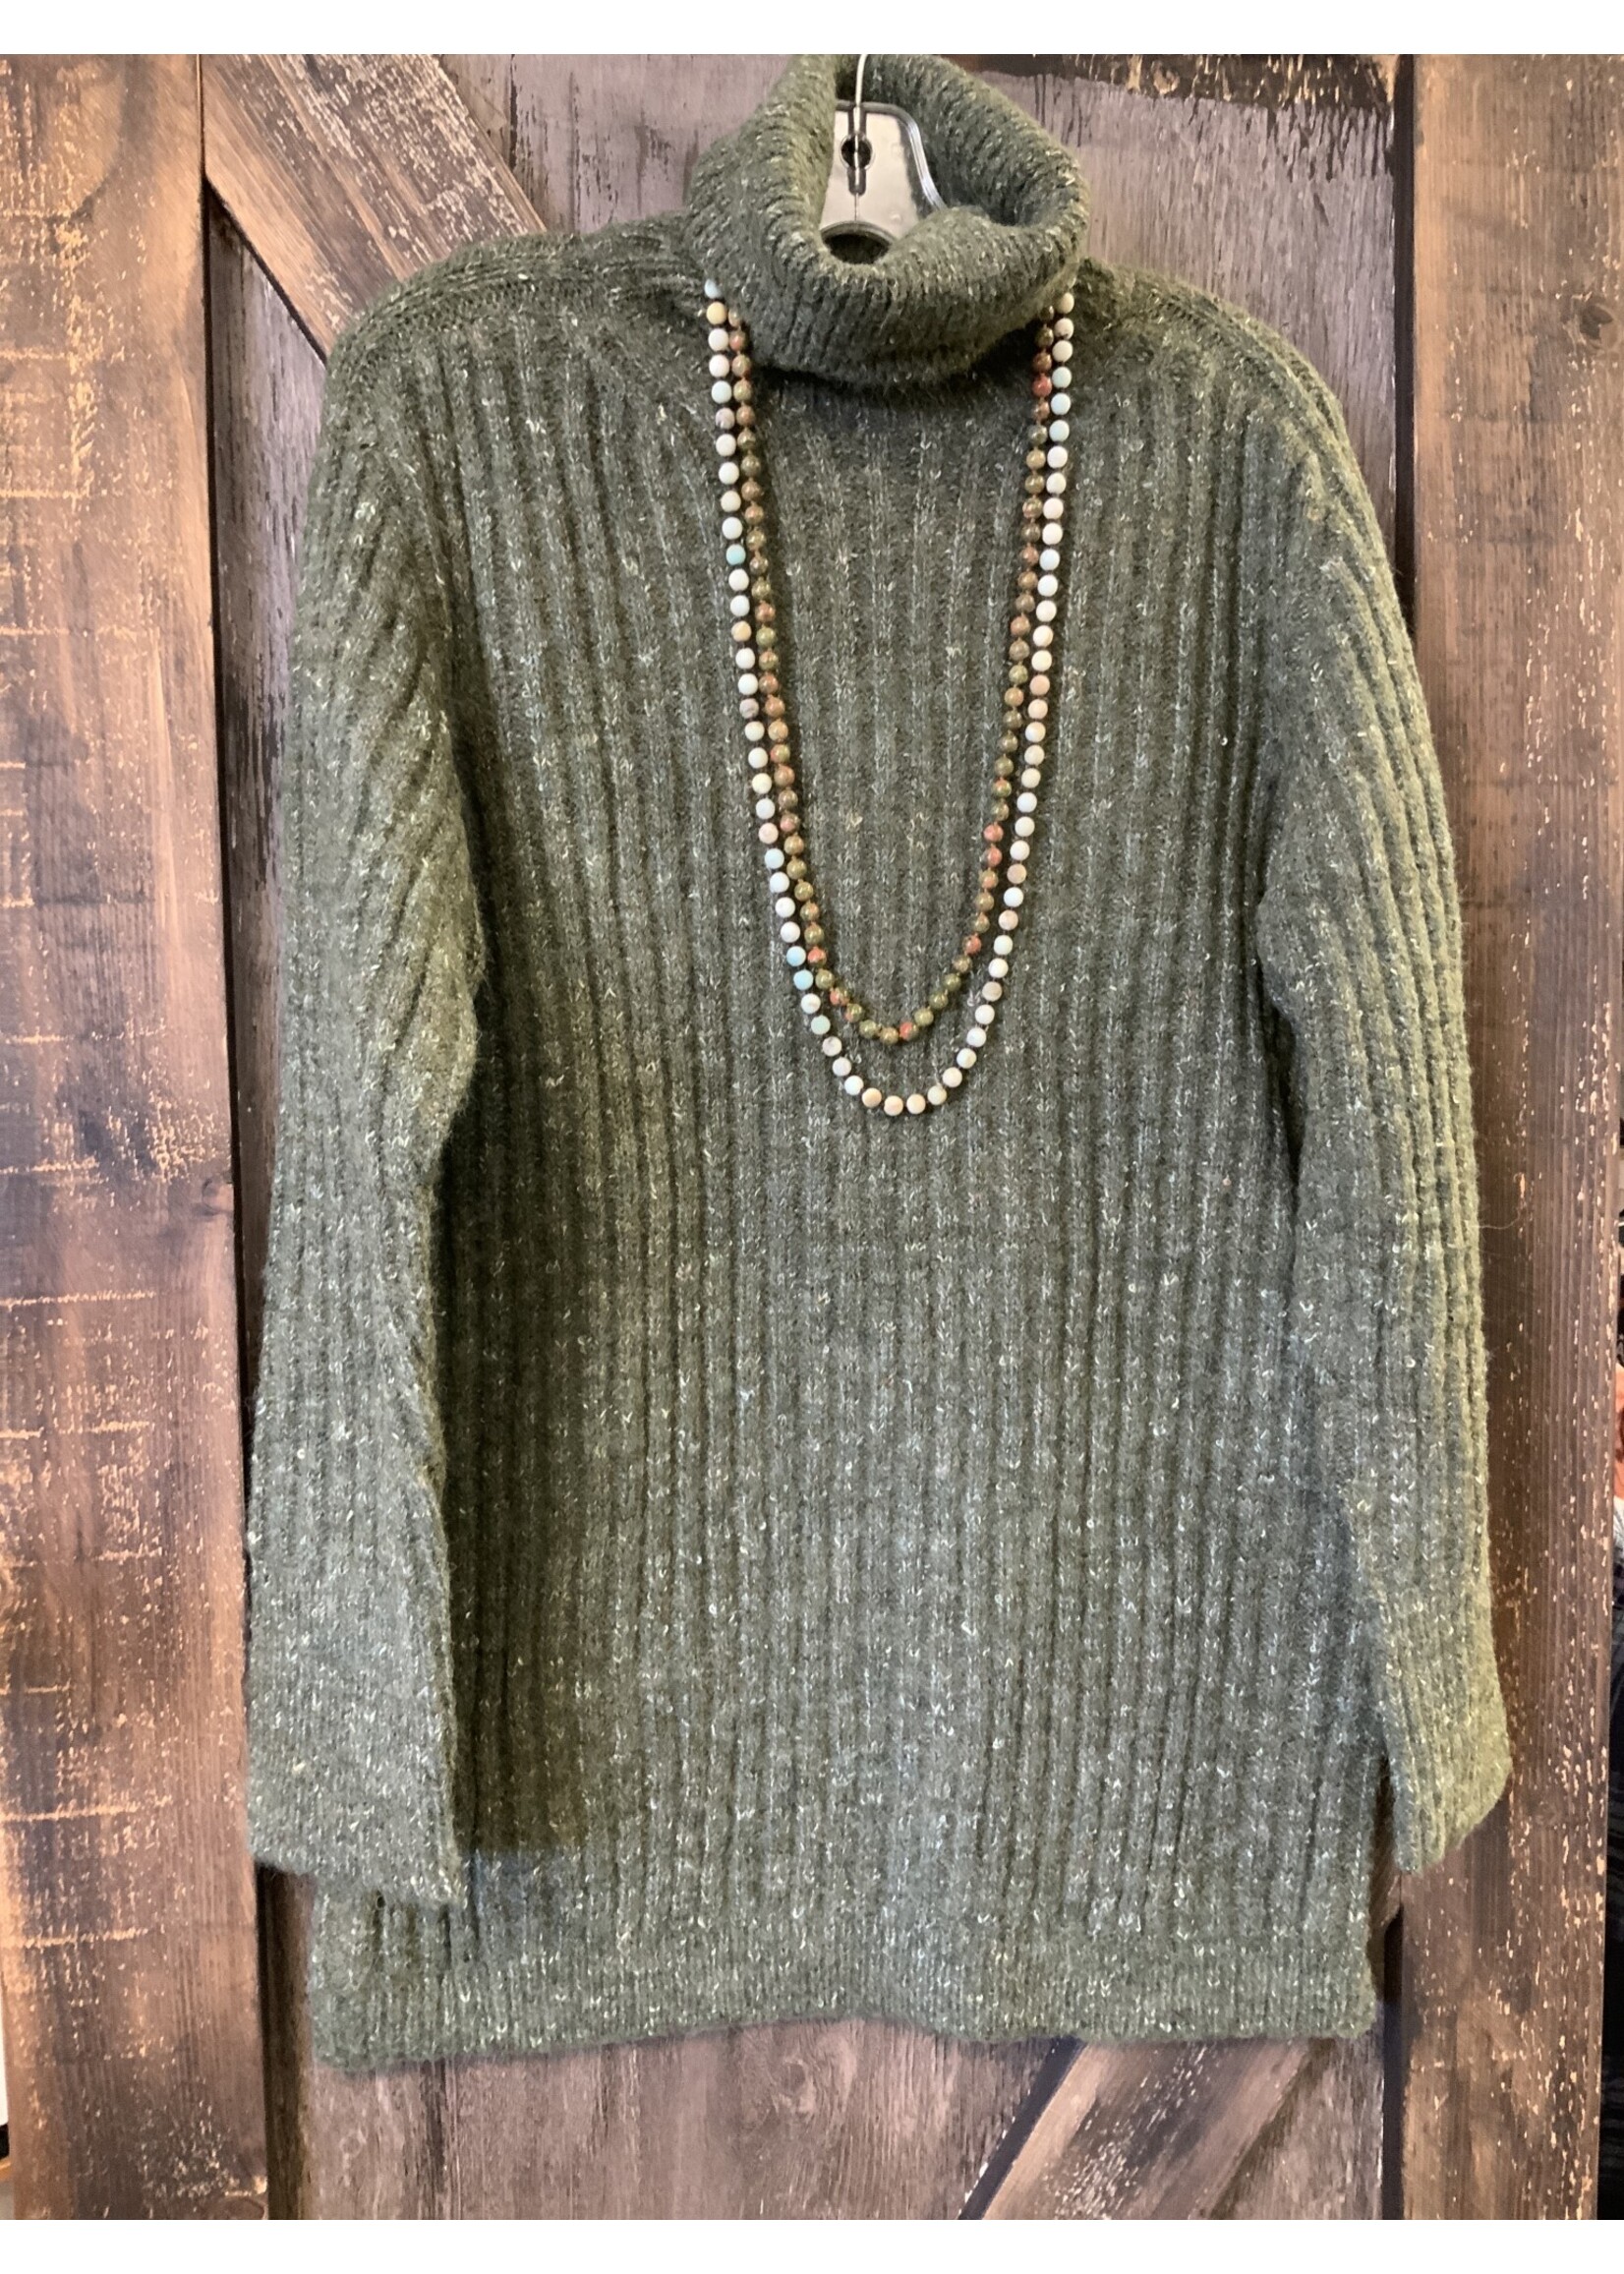 LADIES RIBBED TURTLE NECK COMFY LONG SWEATER OLIVE 62510 S/M